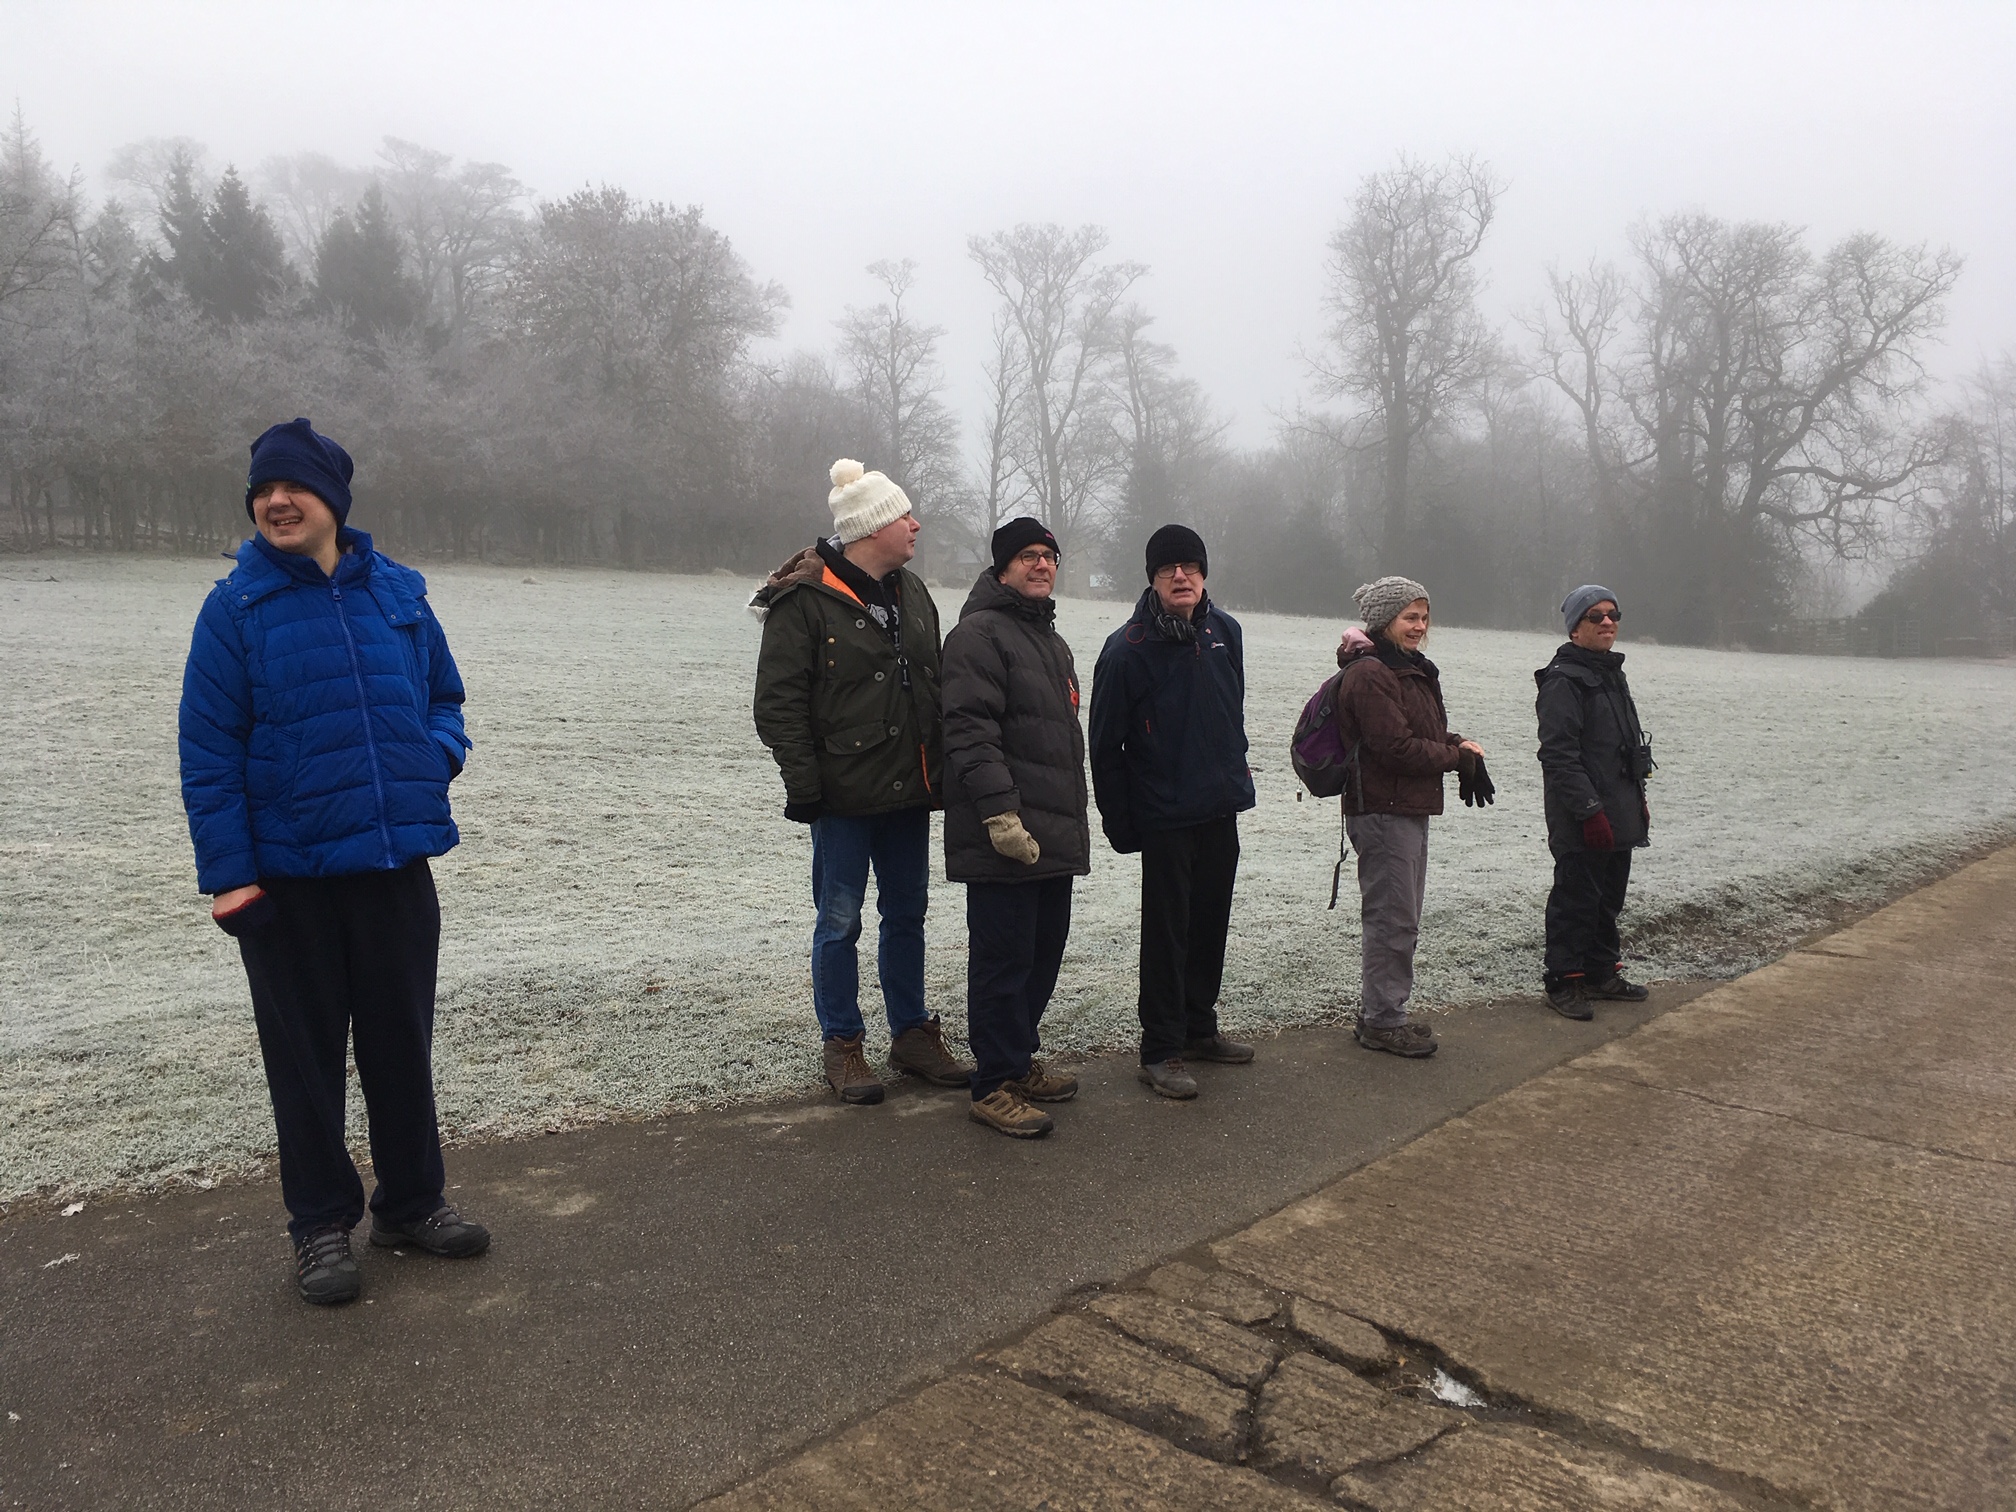 Six people with woolly hats on walking on a track on a cold, foggy day with grass and trees in the background.